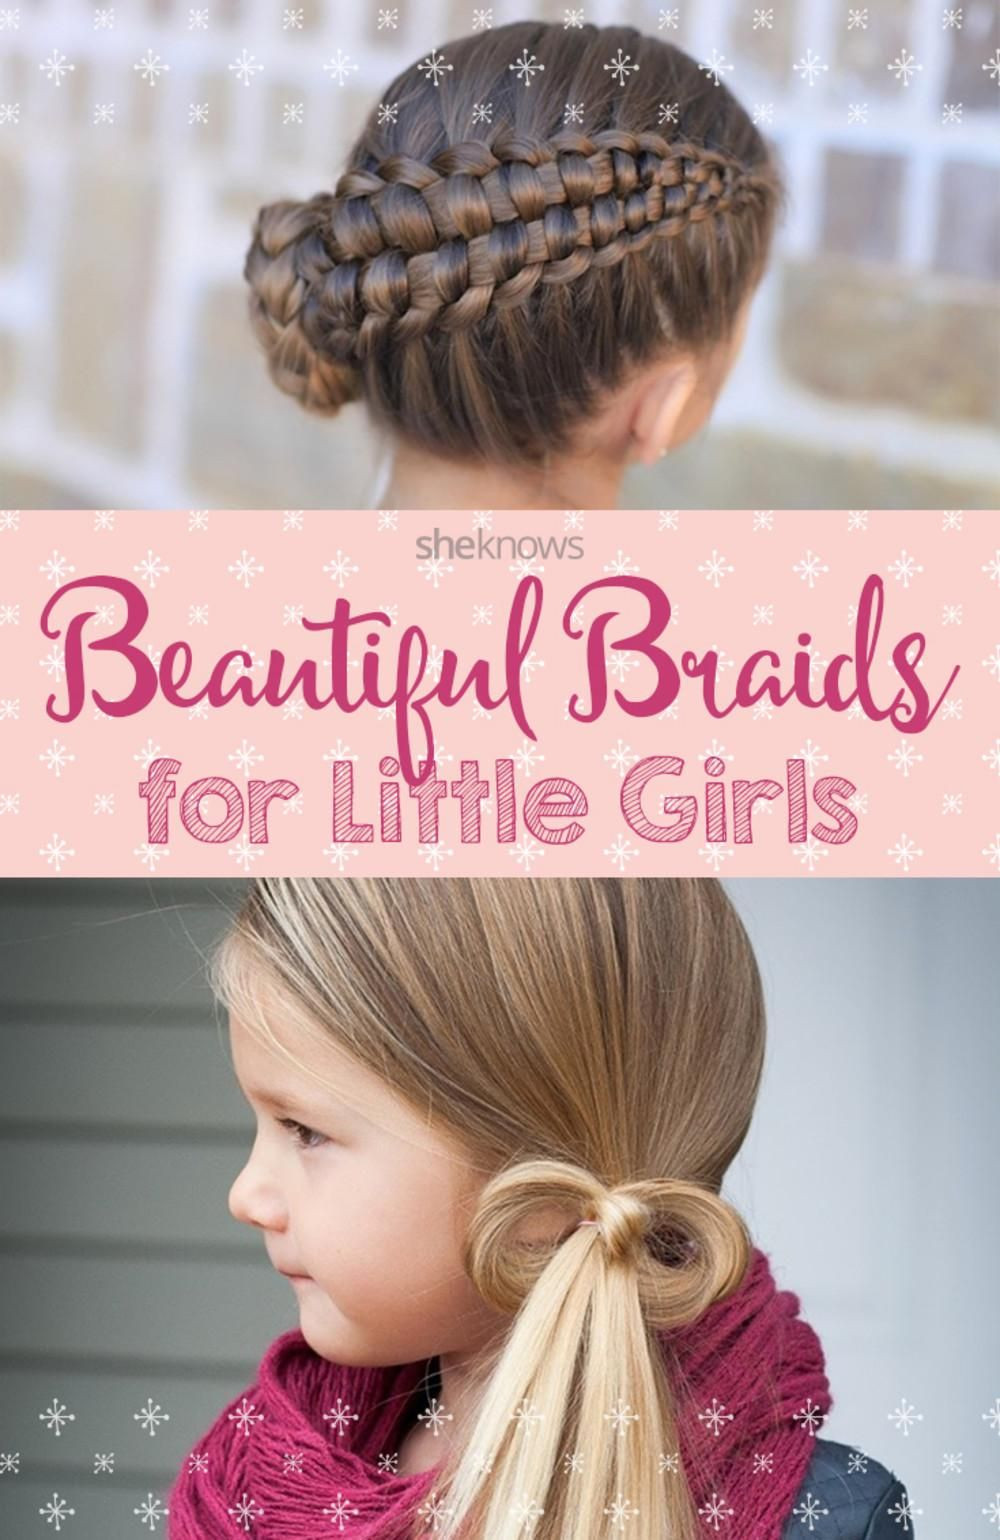 Different Hairstyles For Little Girls
 At least 25 different hairstyles for little girls who love